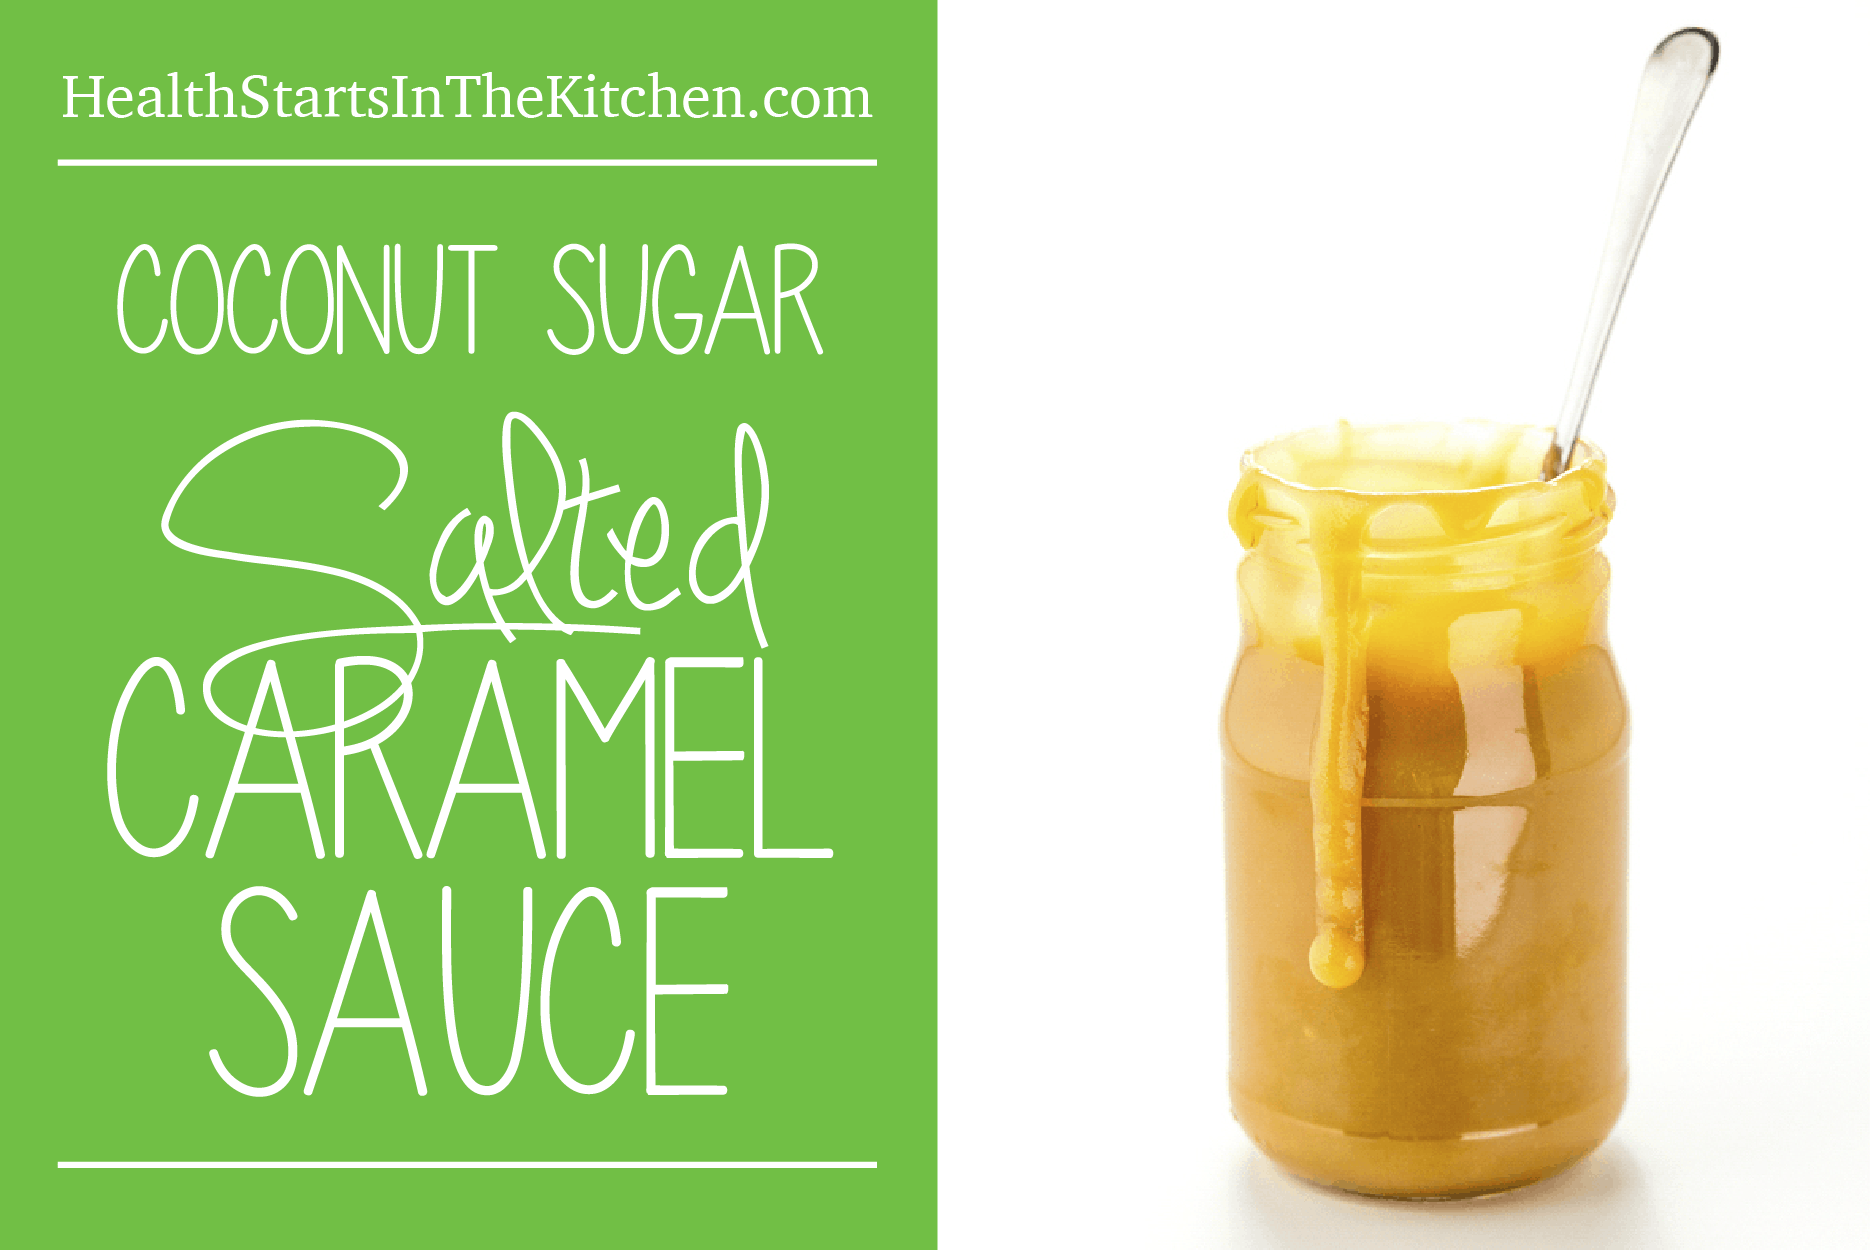 Salted Caramel Sauce made with Coconut Sugar!